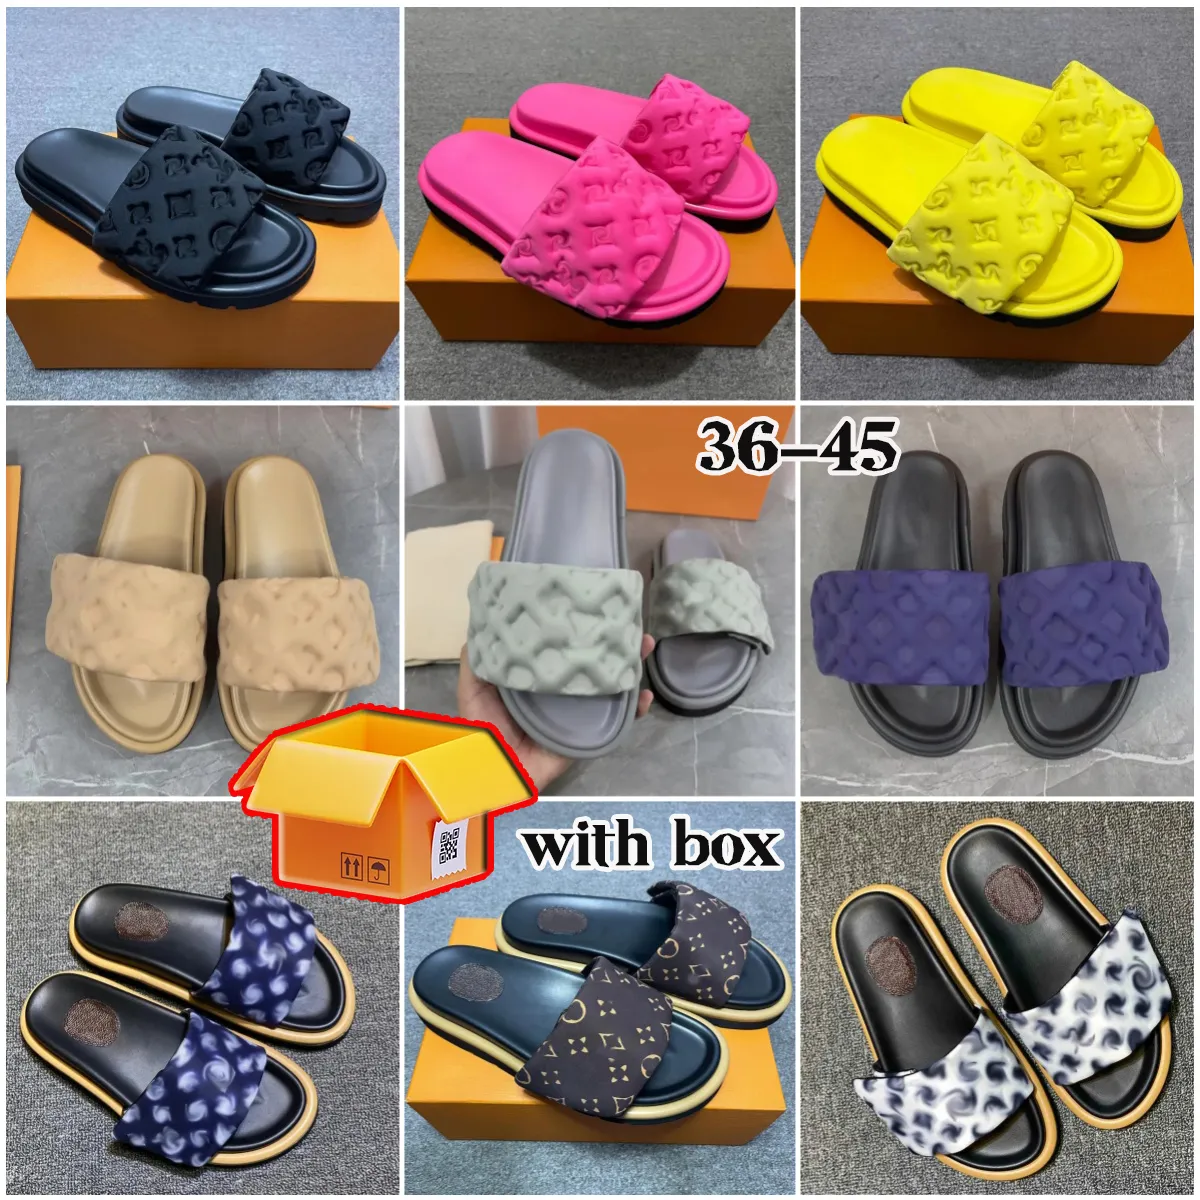 With Box Designer Pool Pillow Slides sandals couples slippers luis men women sandals summer flat shoes viutonly beach slippes Slide shoes luxury Free Shipping